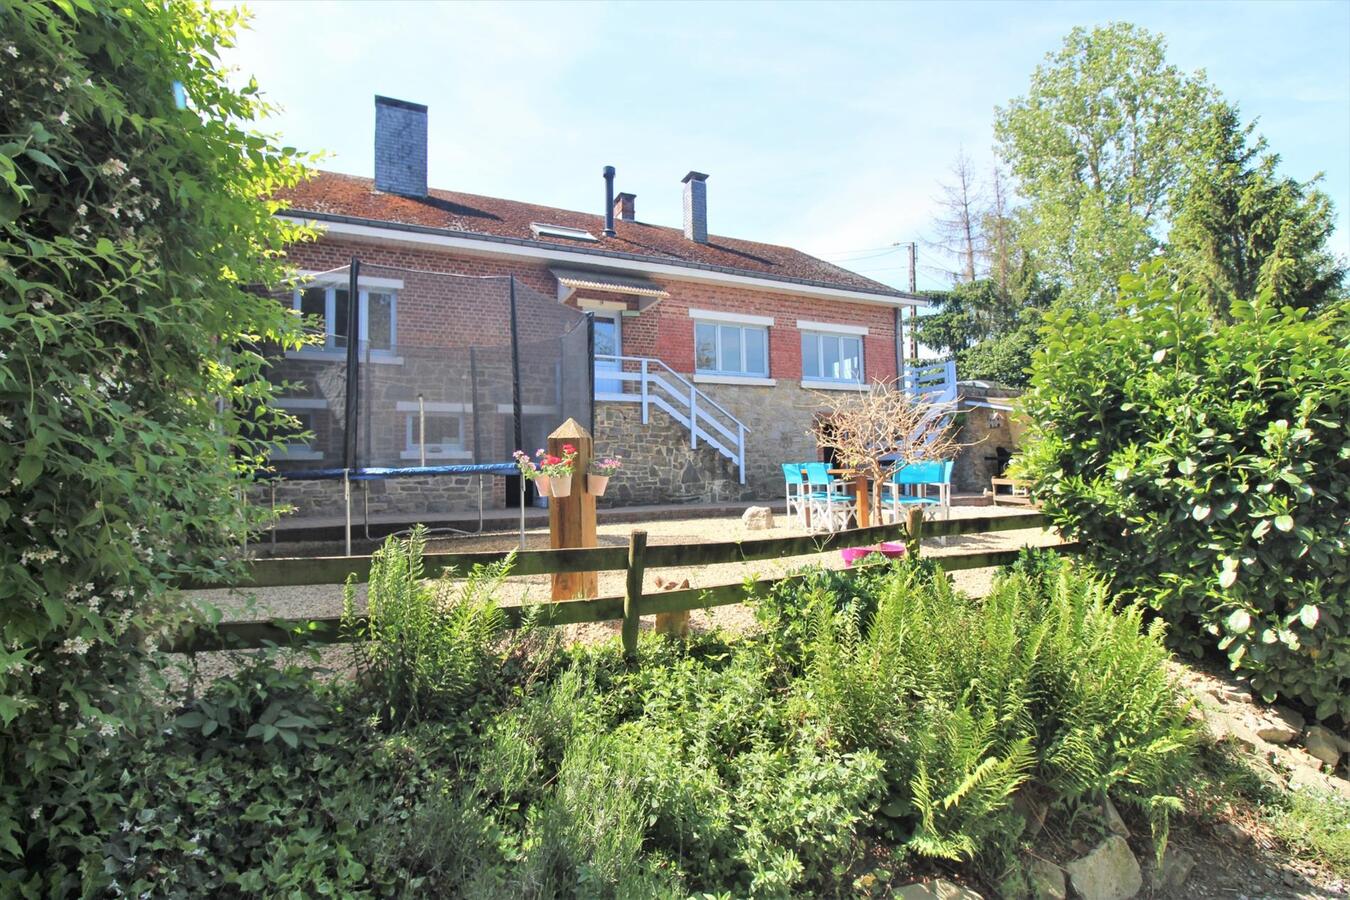 Property sold in Somme-Leuze